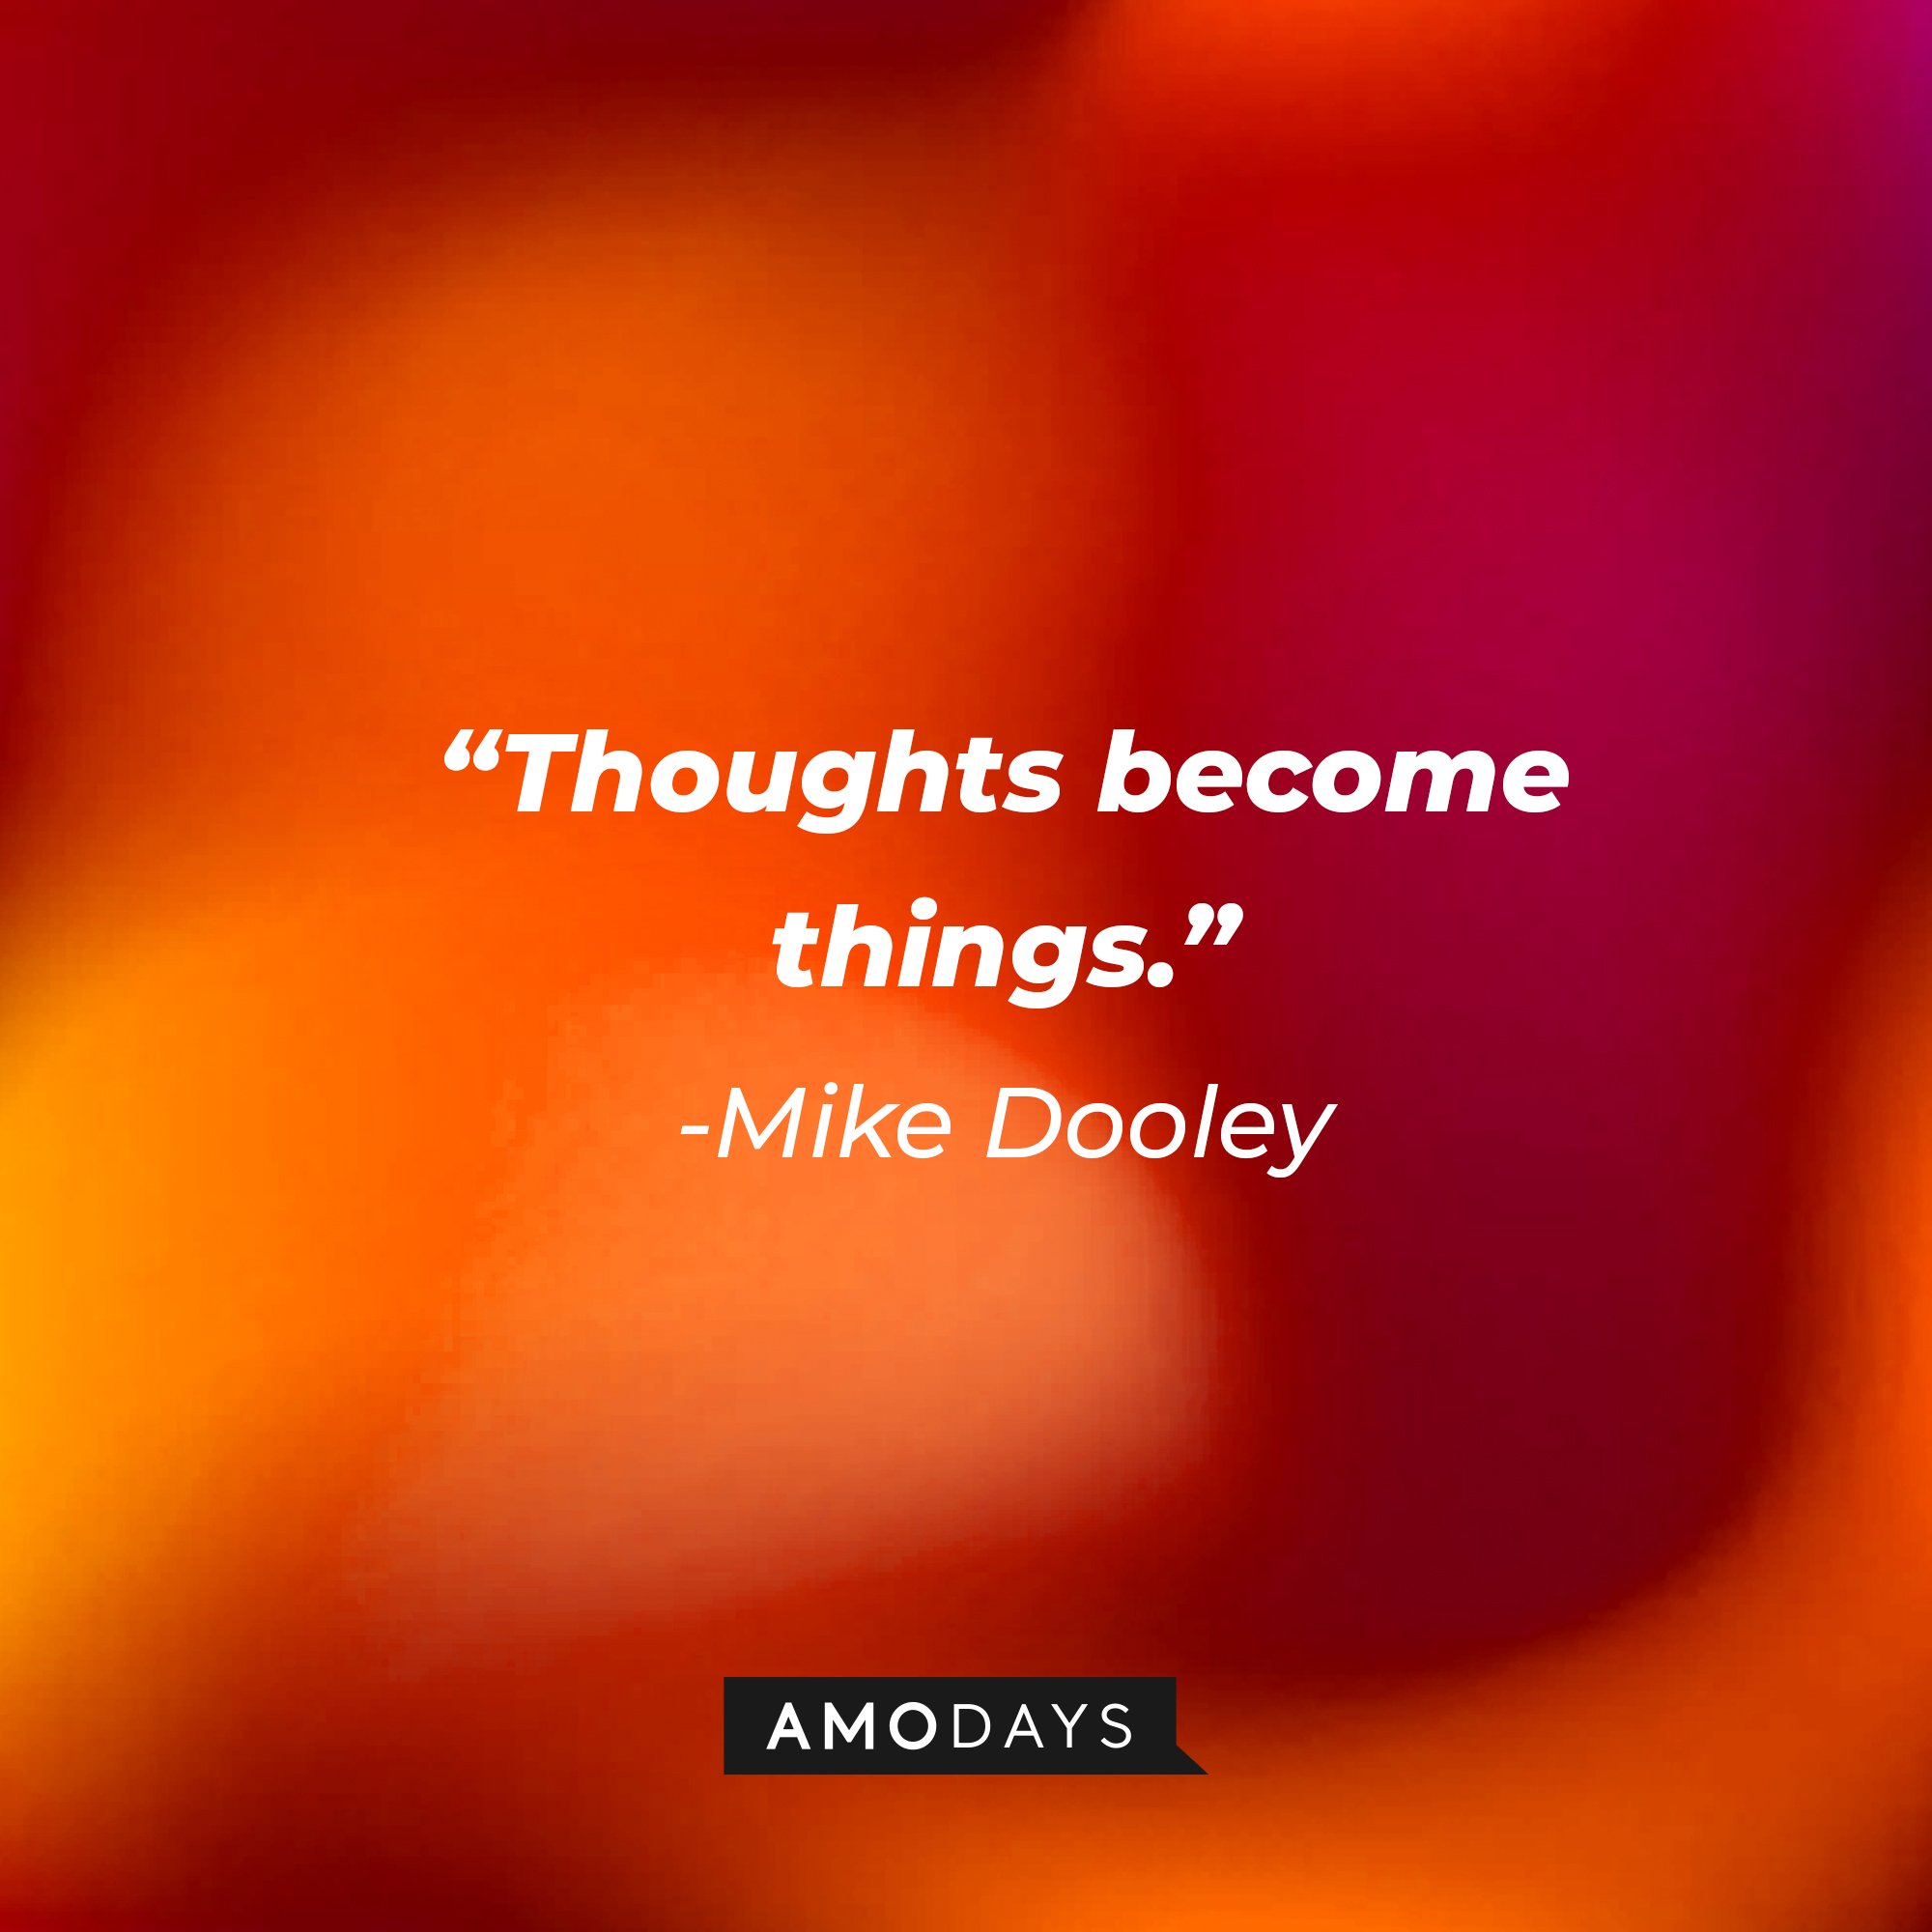 Mike Dooley’s quote: “Thoughts become things.” | Image: AmoDays